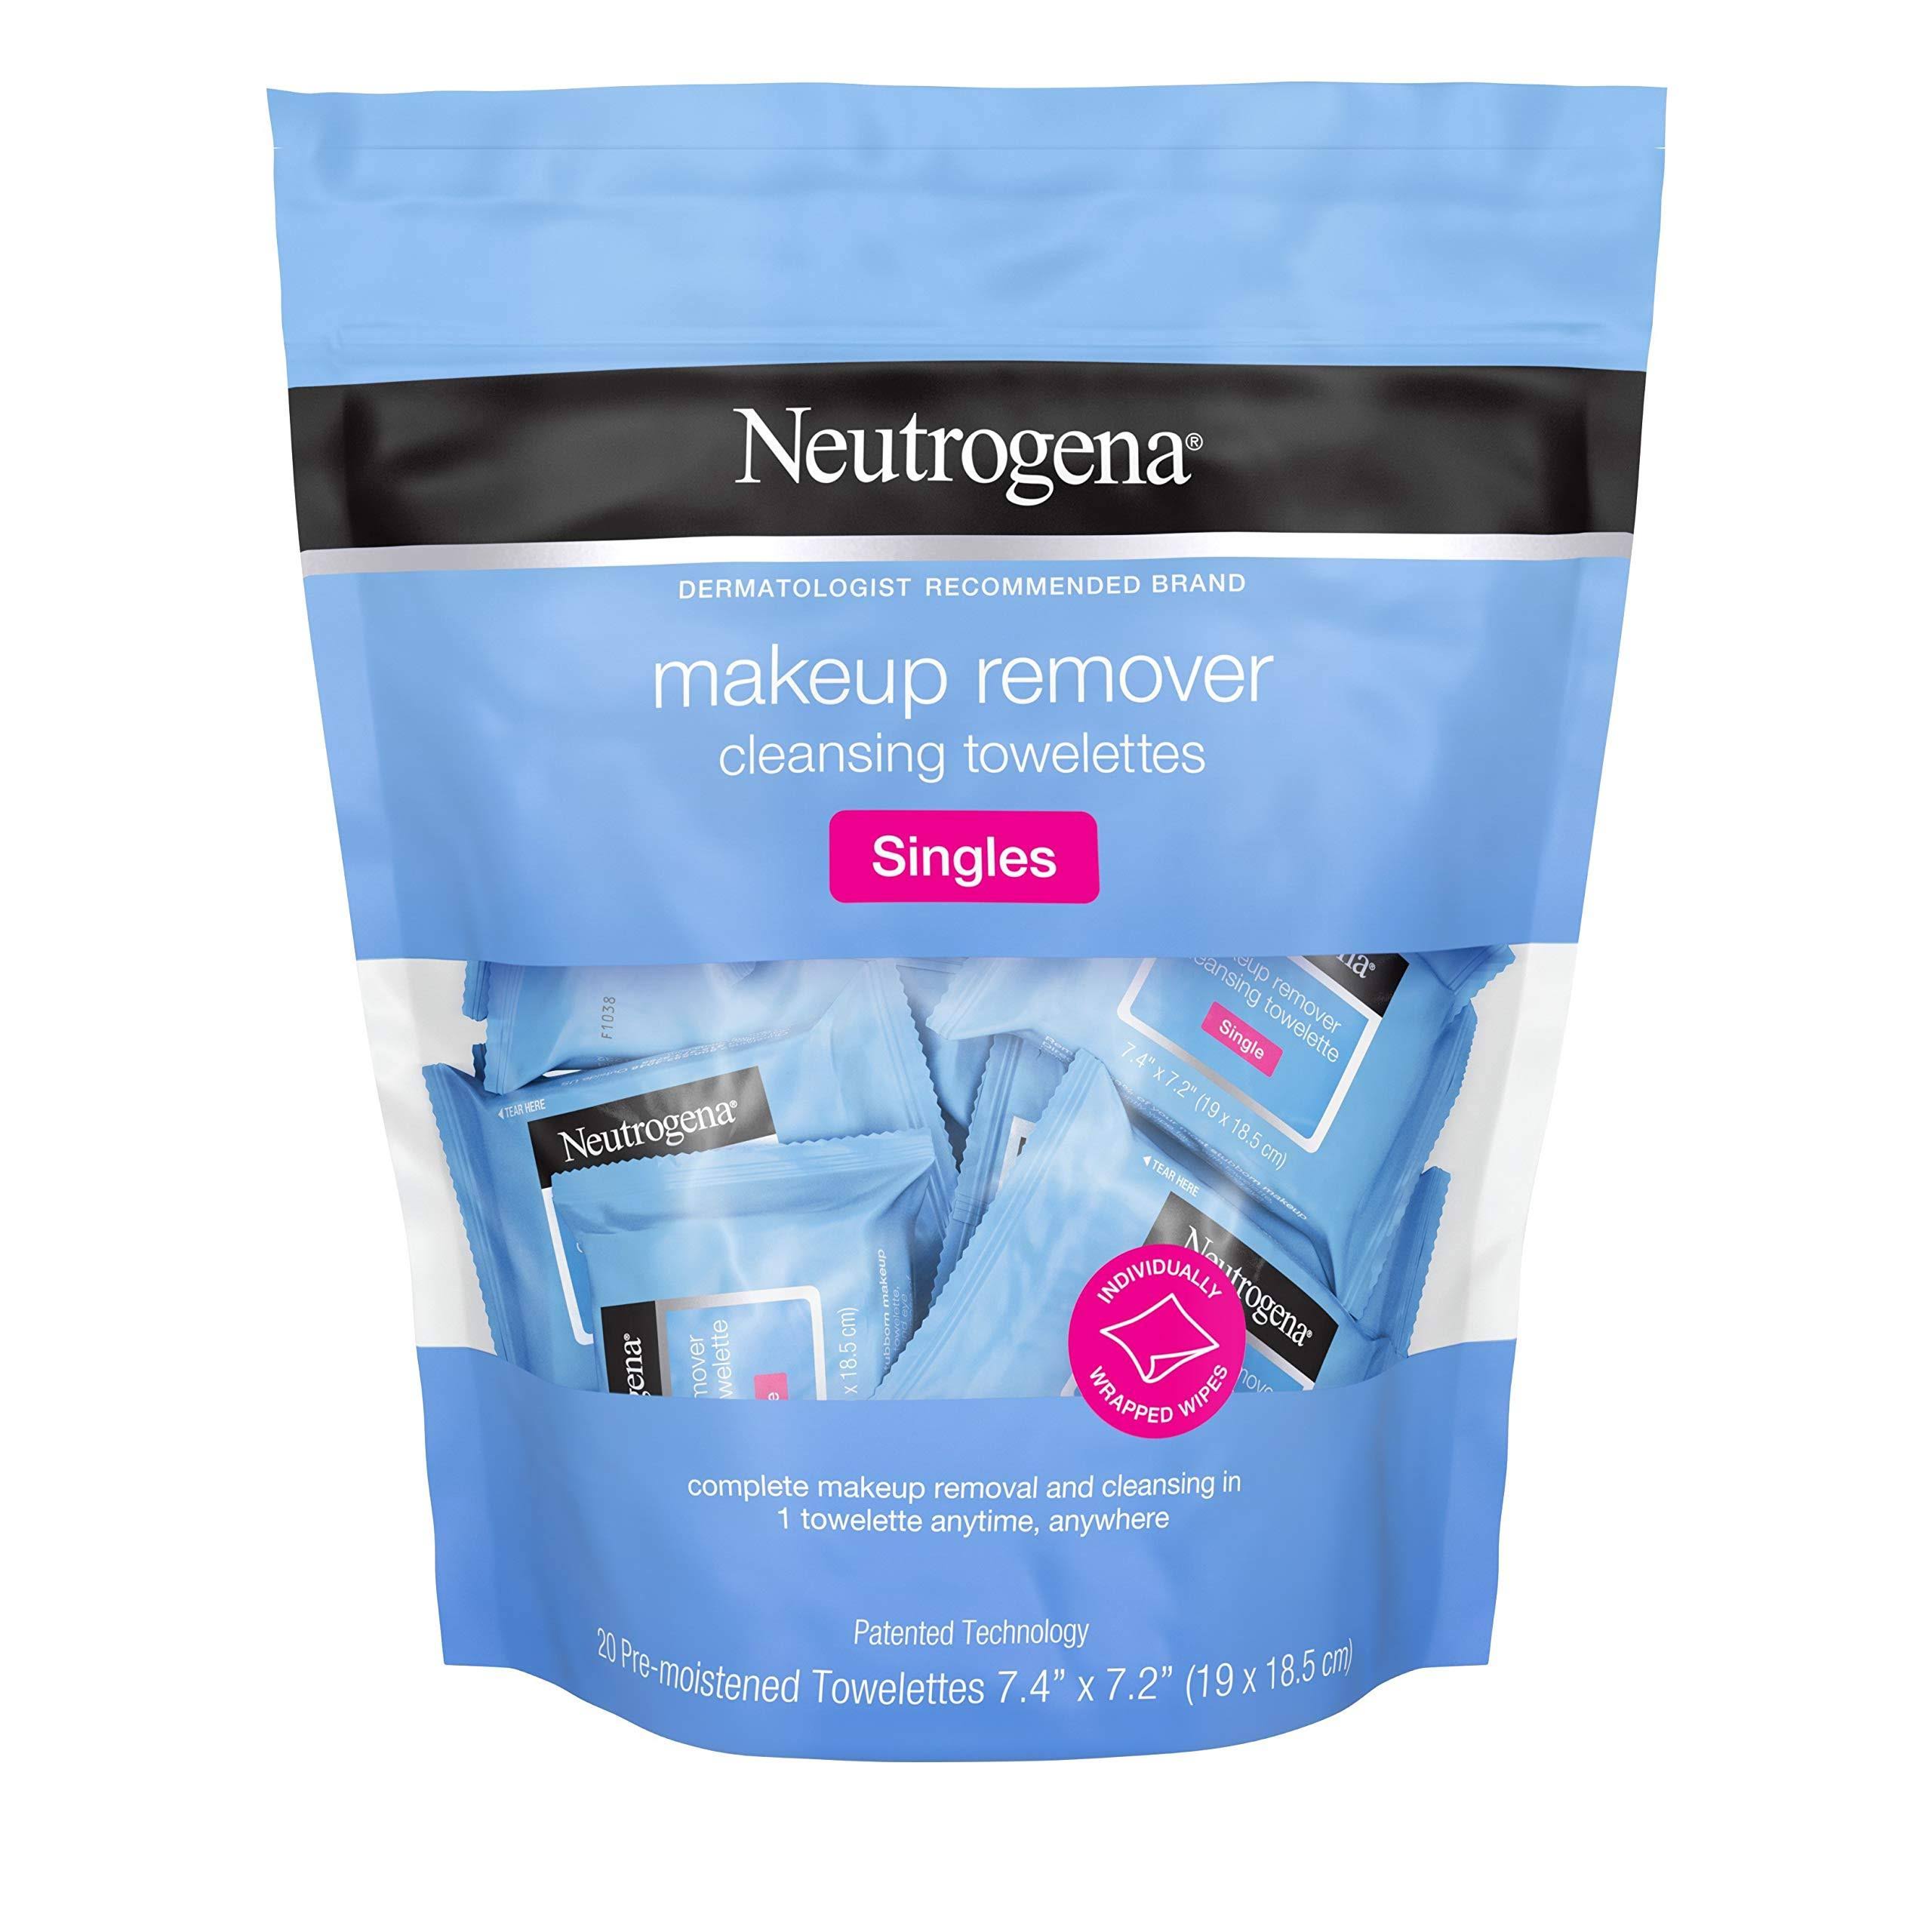 Neutrogena Makeup Remover Cleansing Towelettes Singles 20 CT